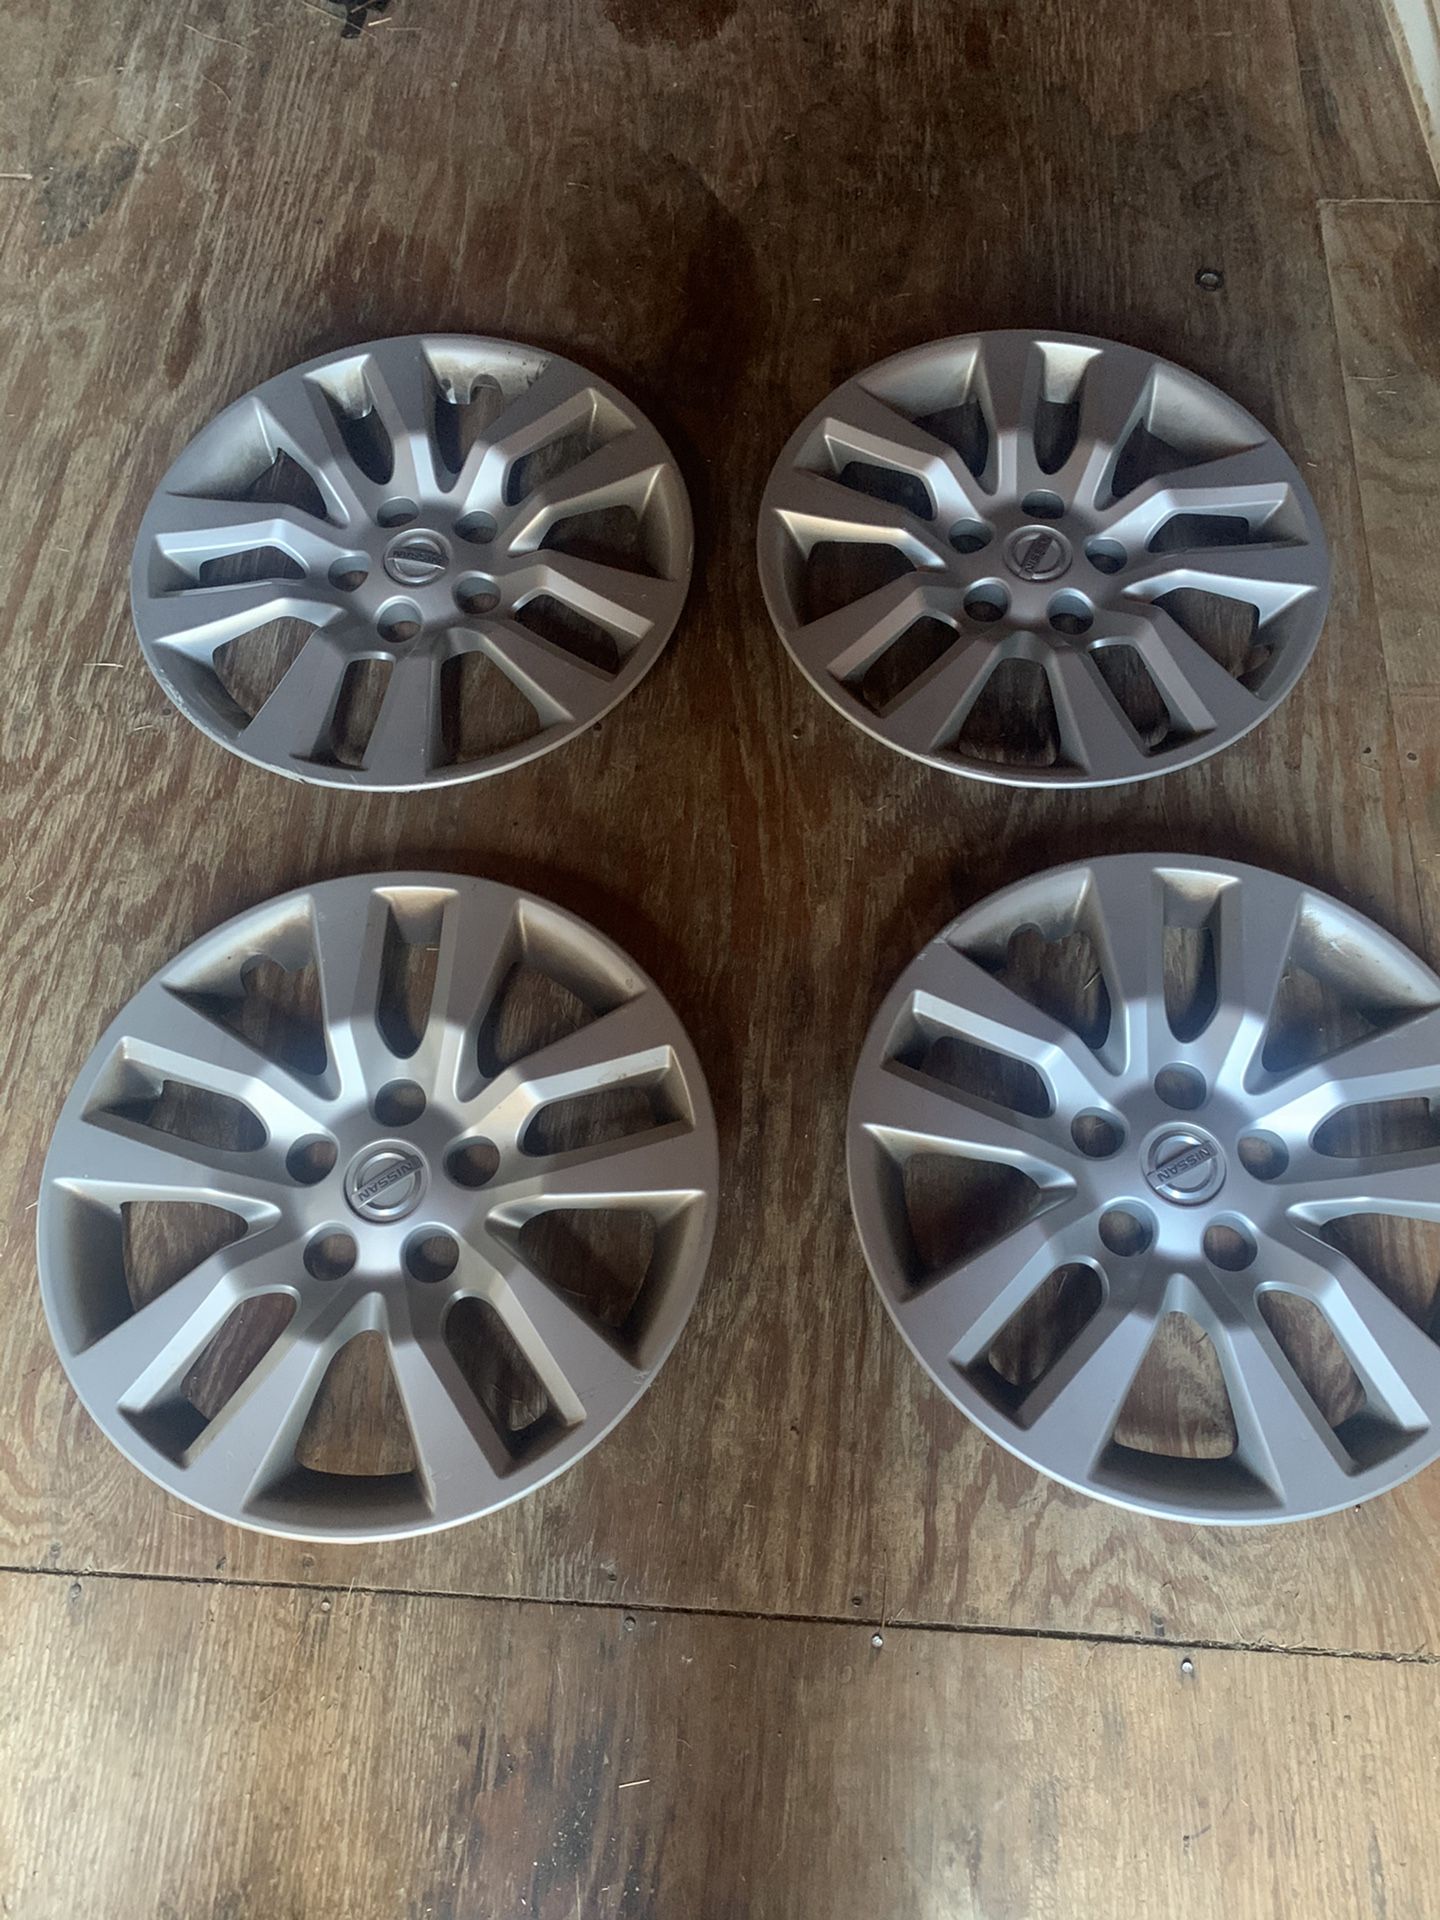 16 inch Nissan Altima Hubcaps